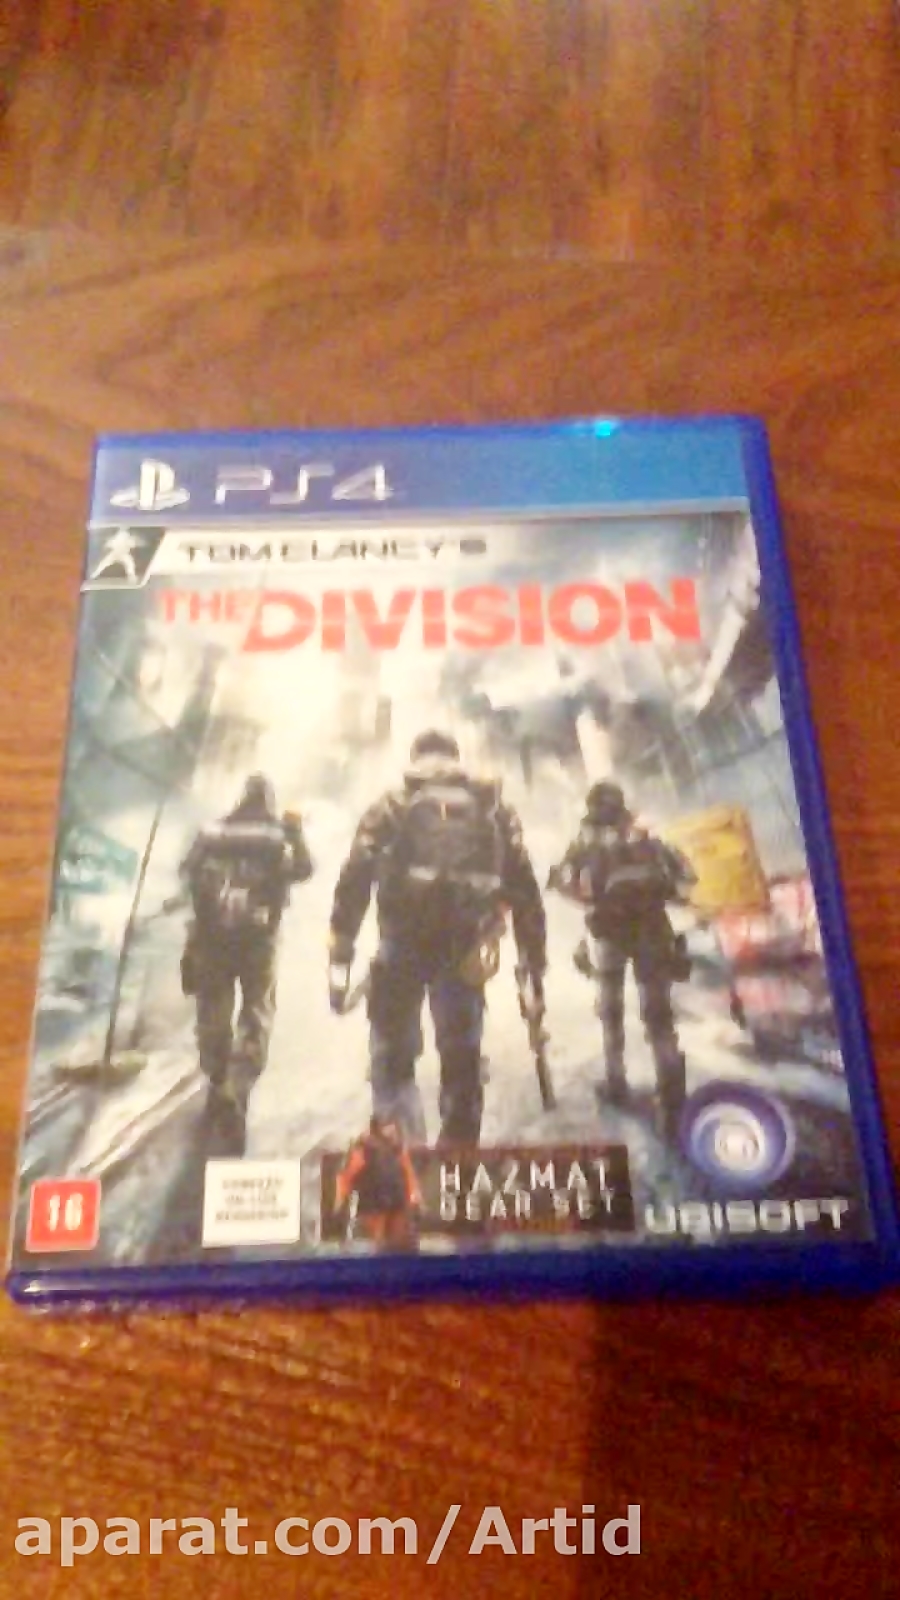 Unboxing the division